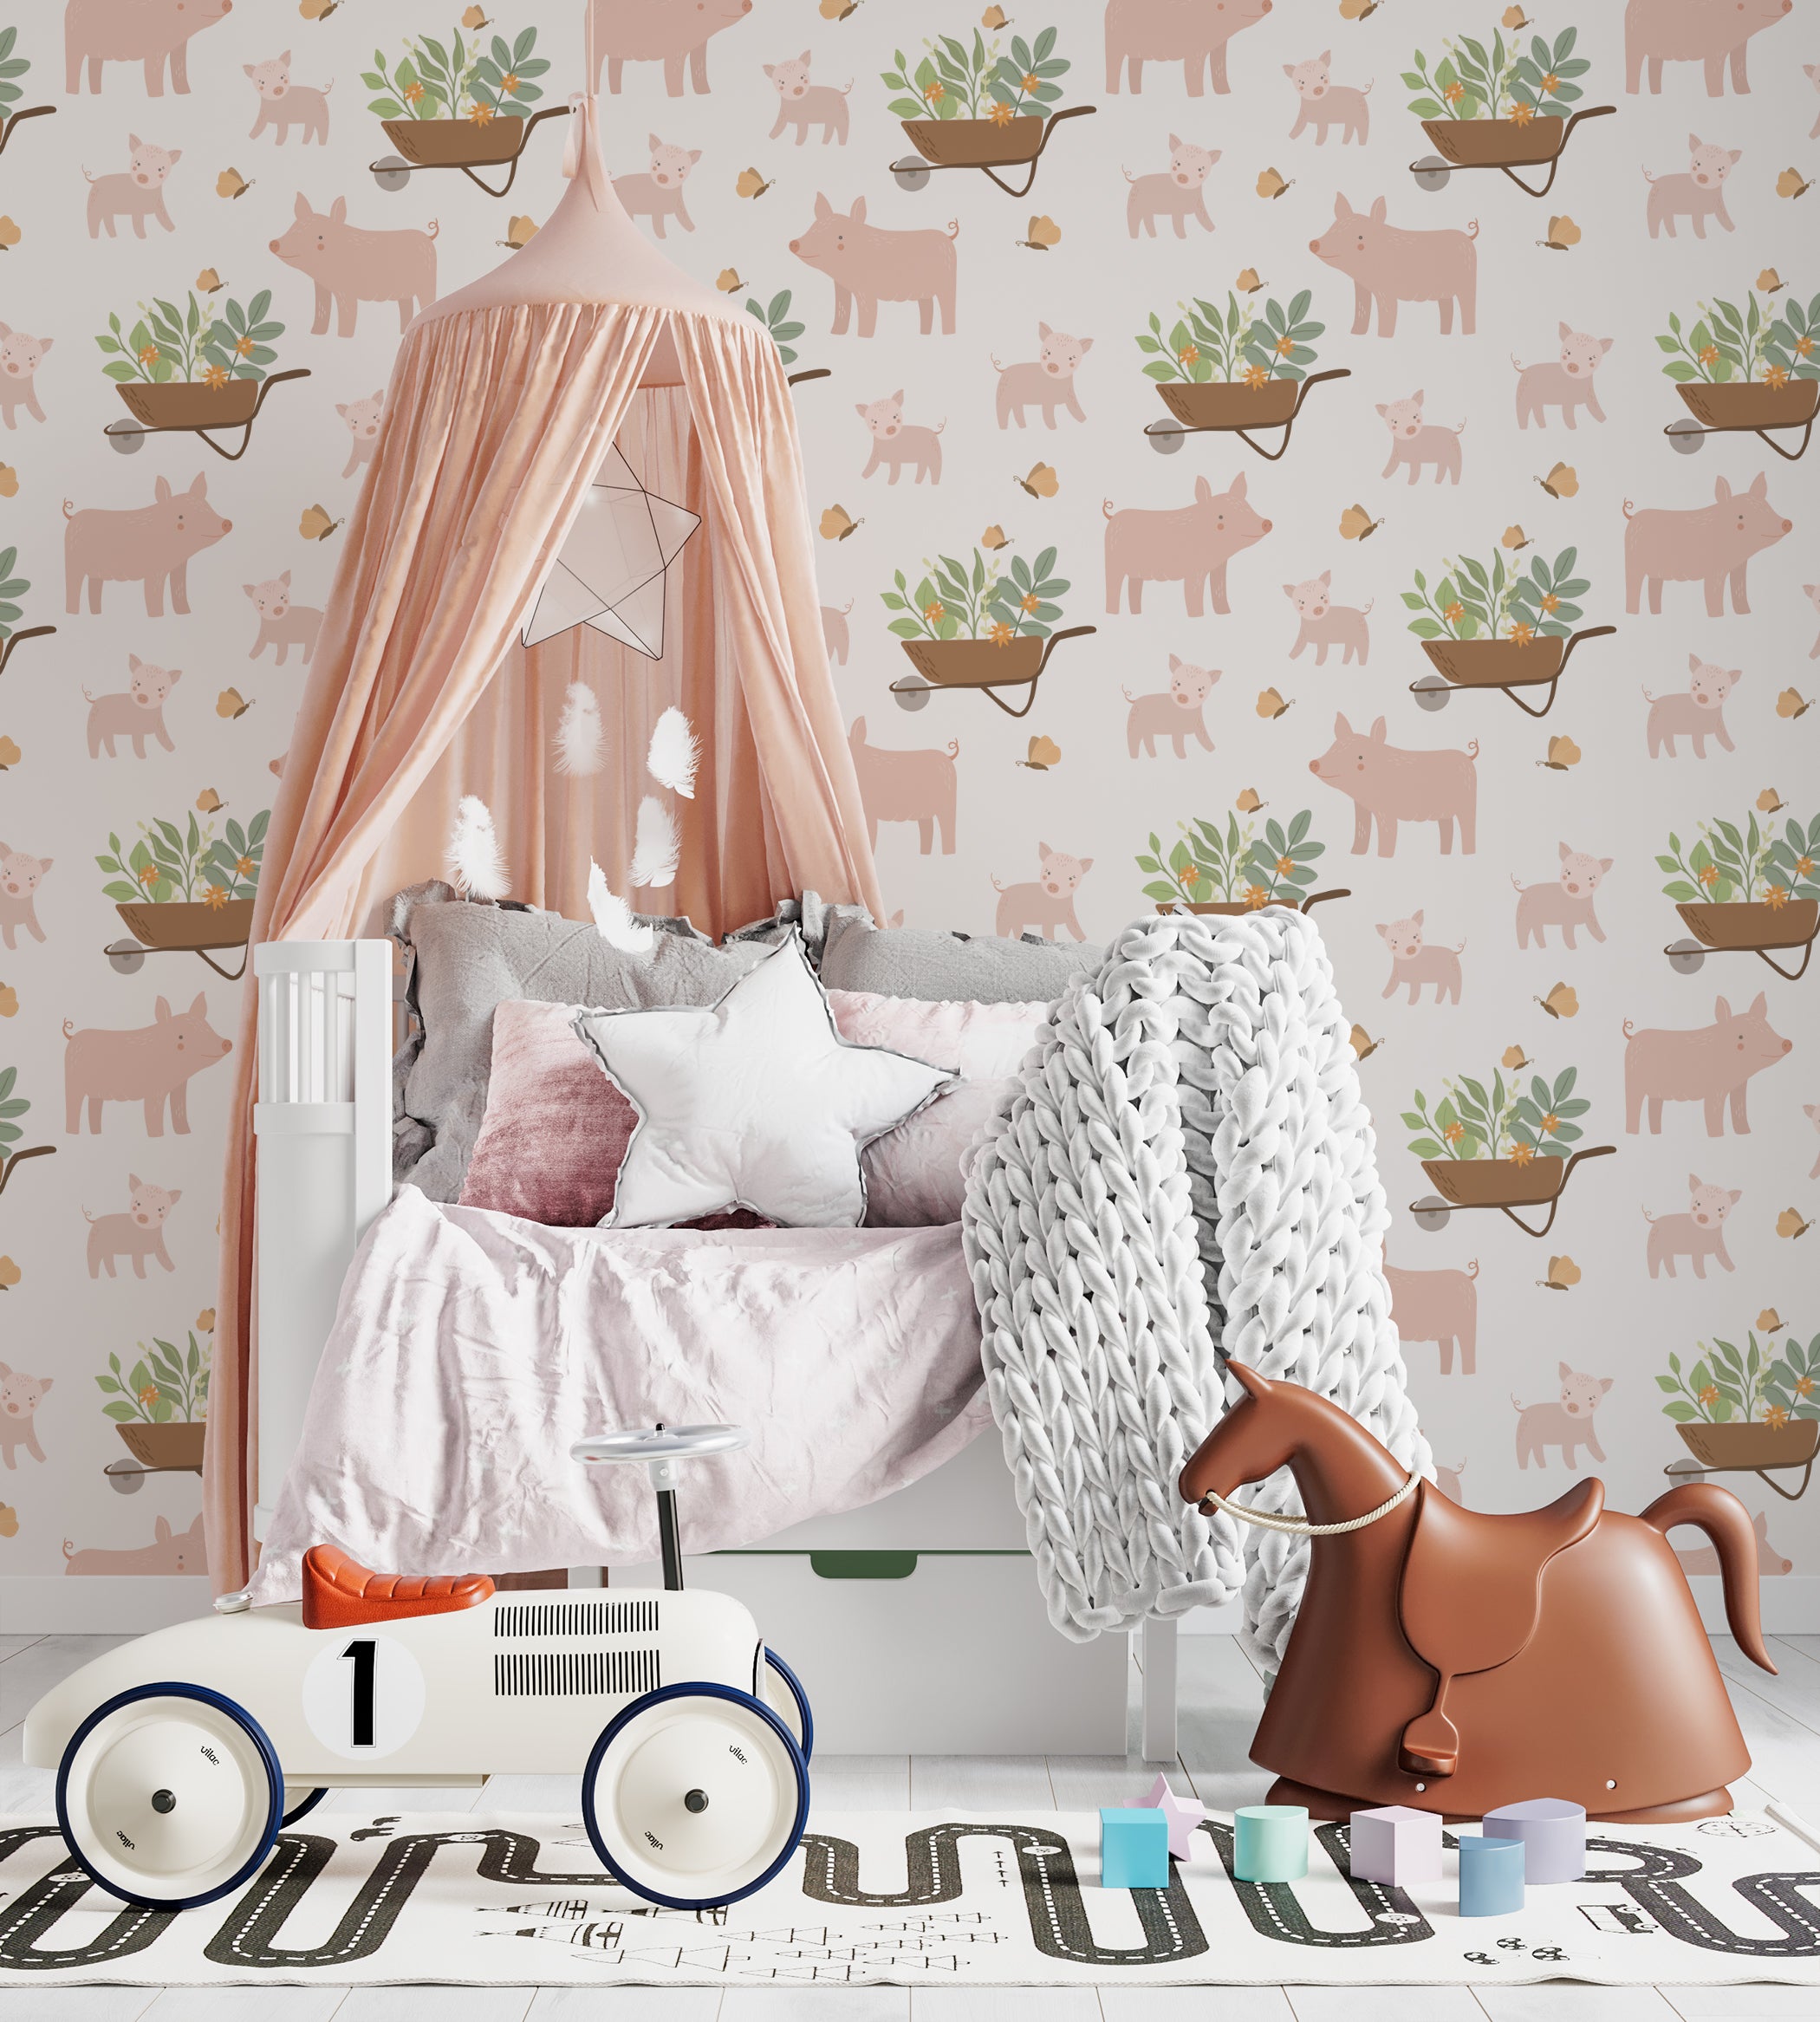 Children's room decorated with Spring Farm Wallpaper featuring pig patterns and wheelbarrows with plants.